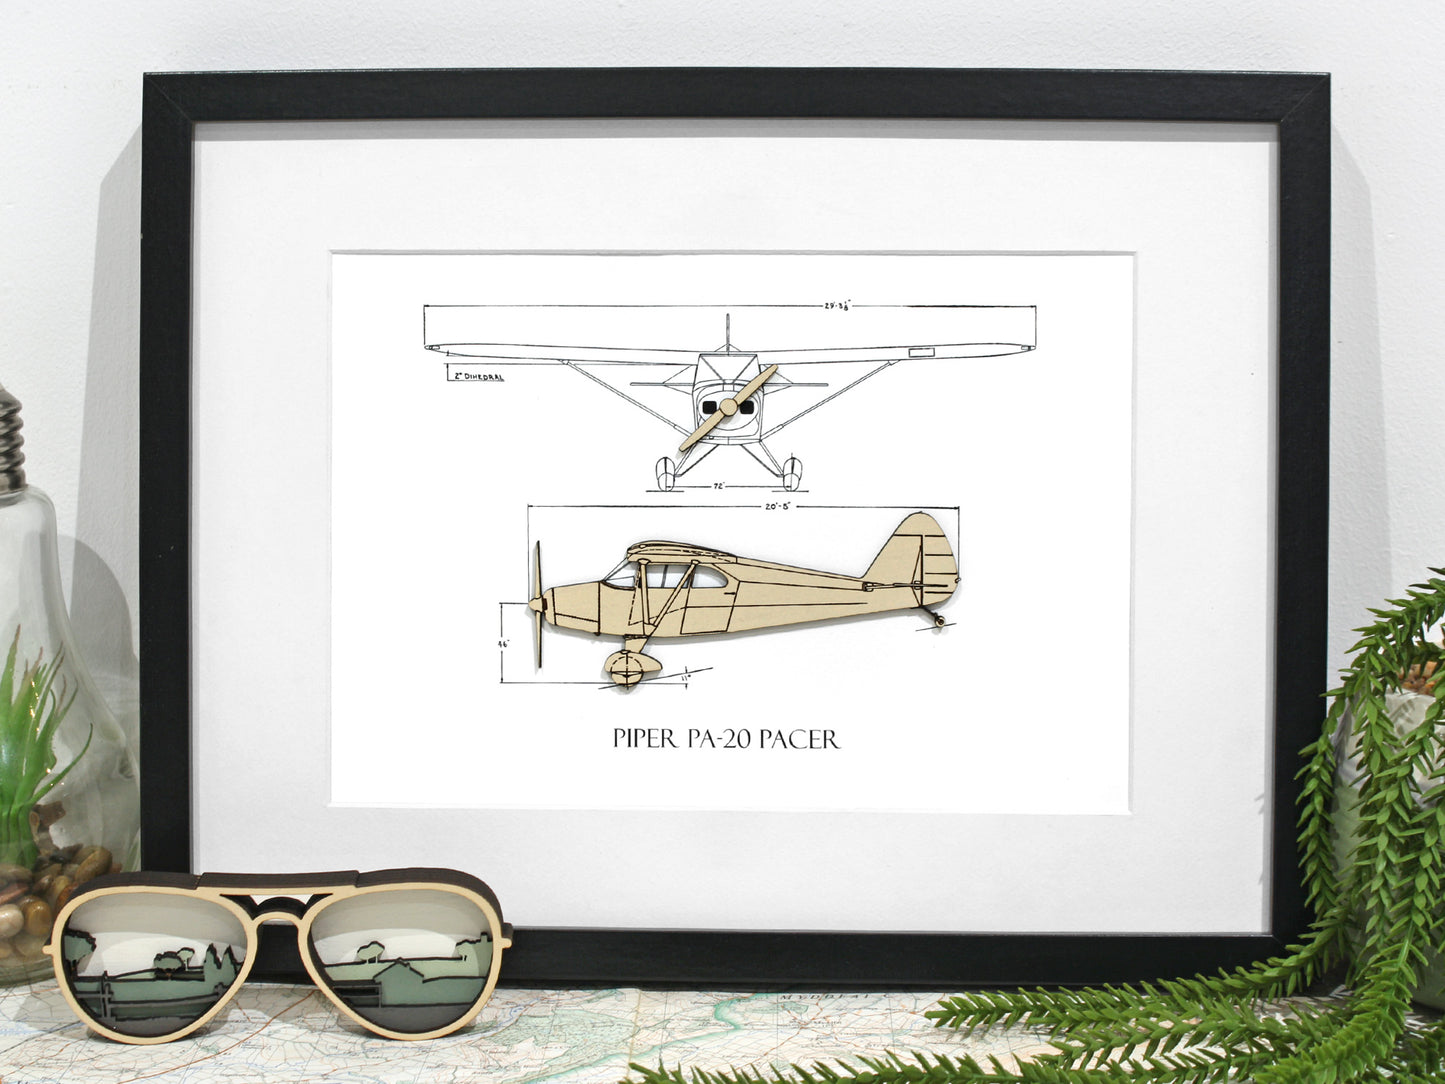 Piper PA-20 Pacer pilot gifts